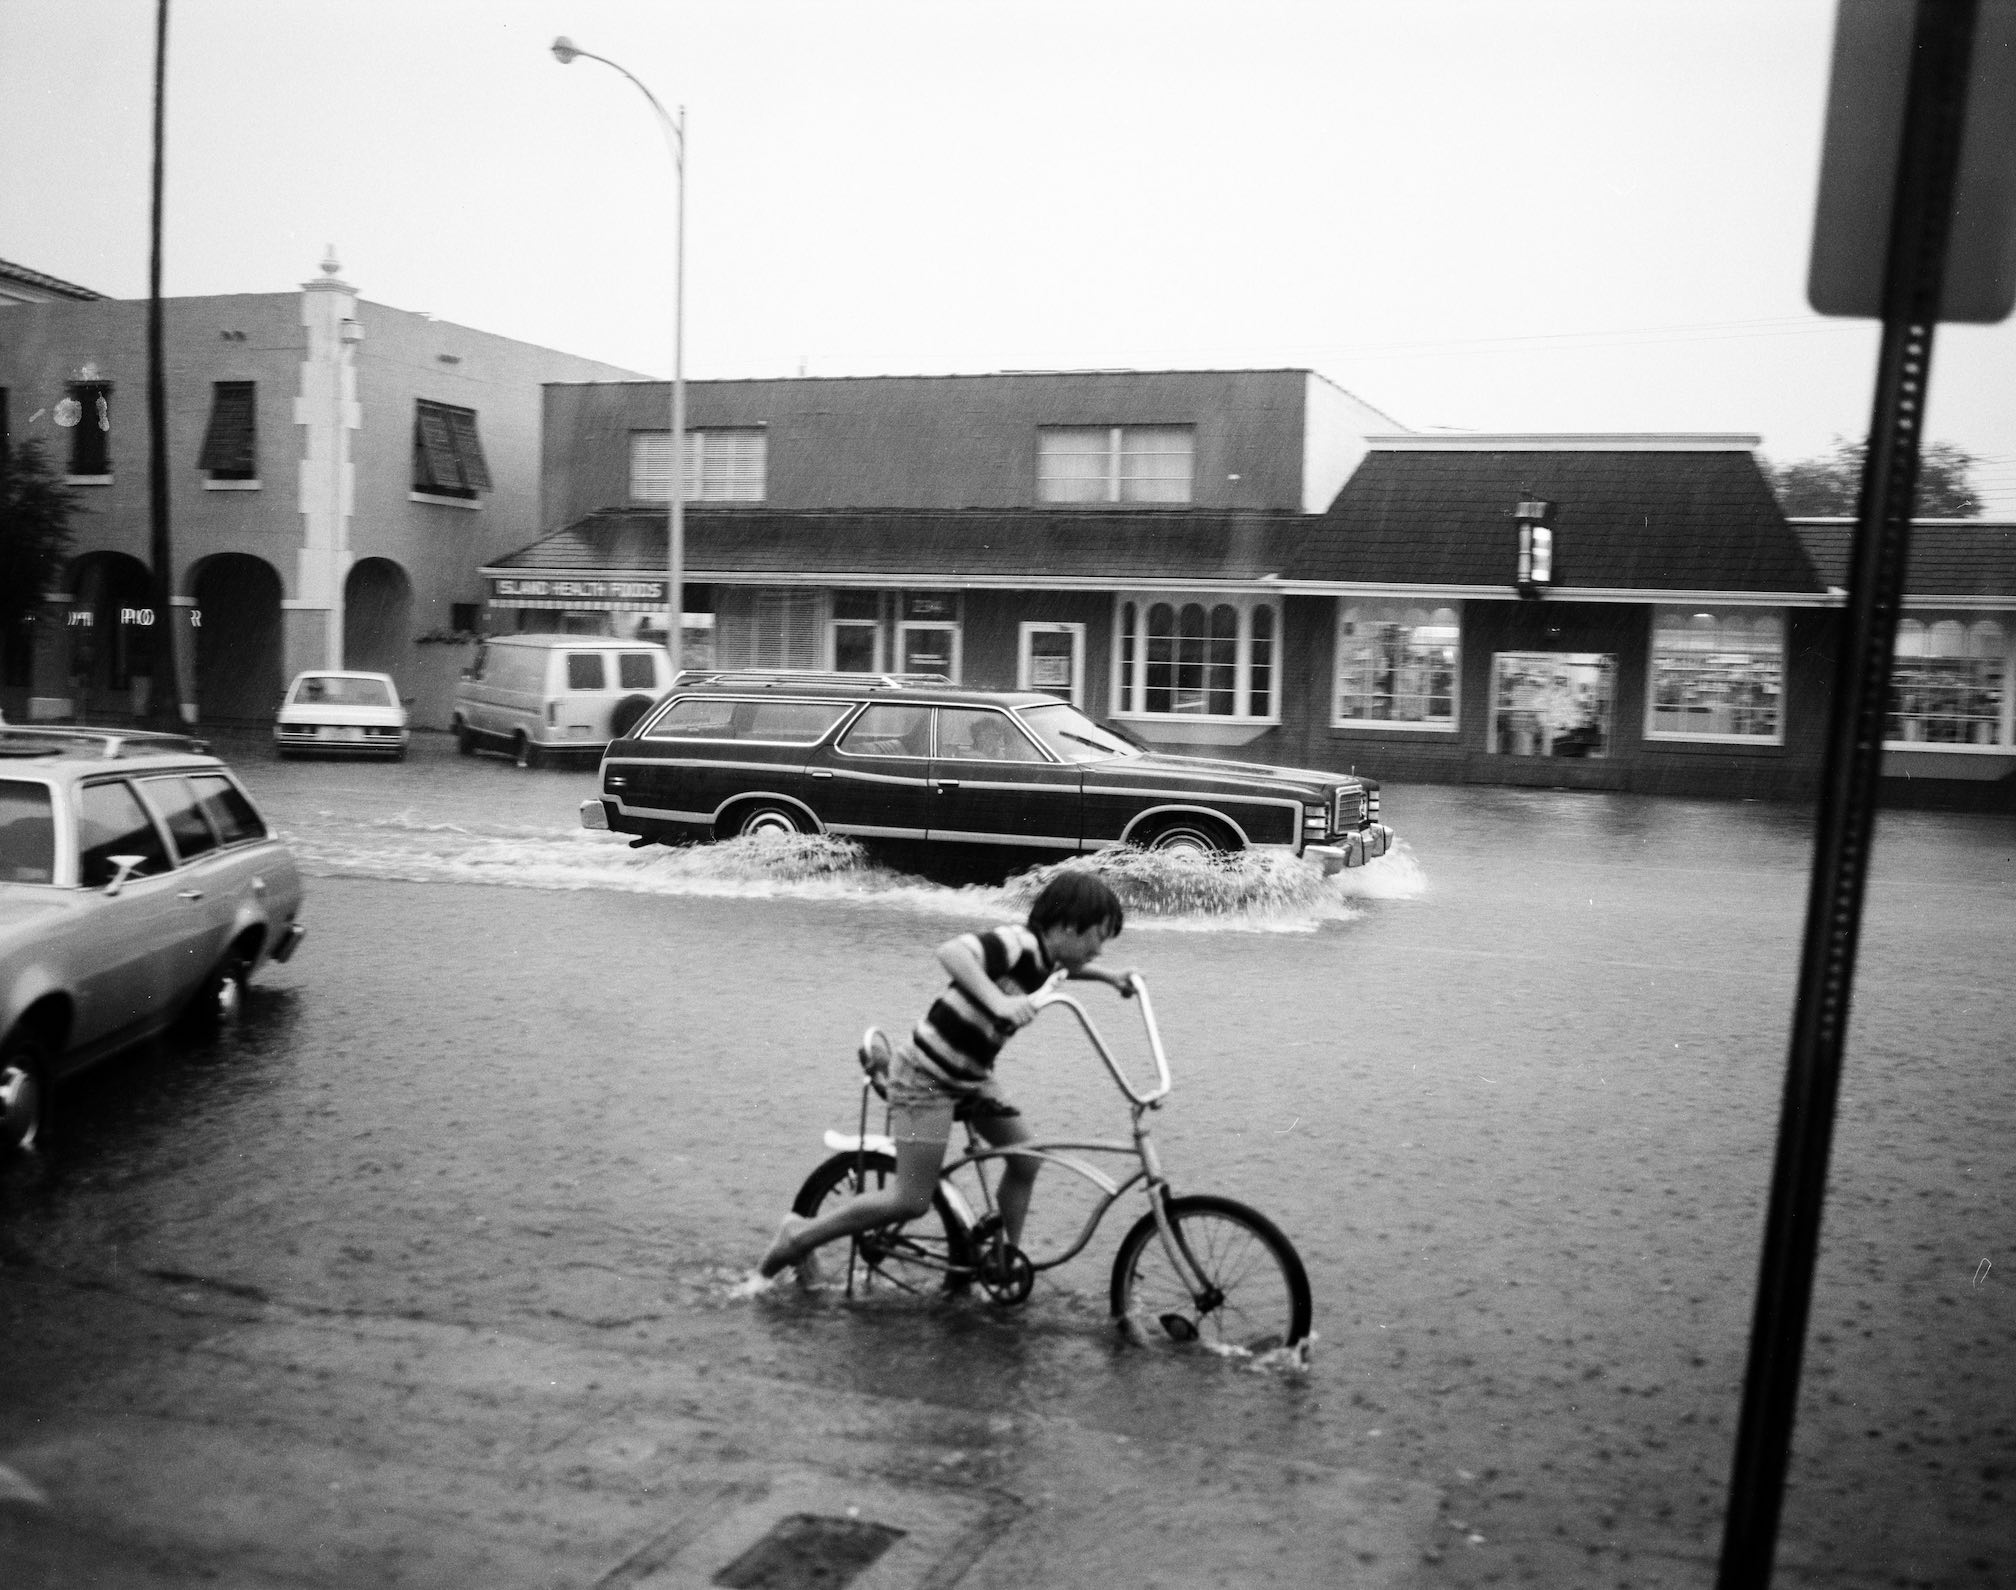 Boy riding bicycle through storm water through commercial street.